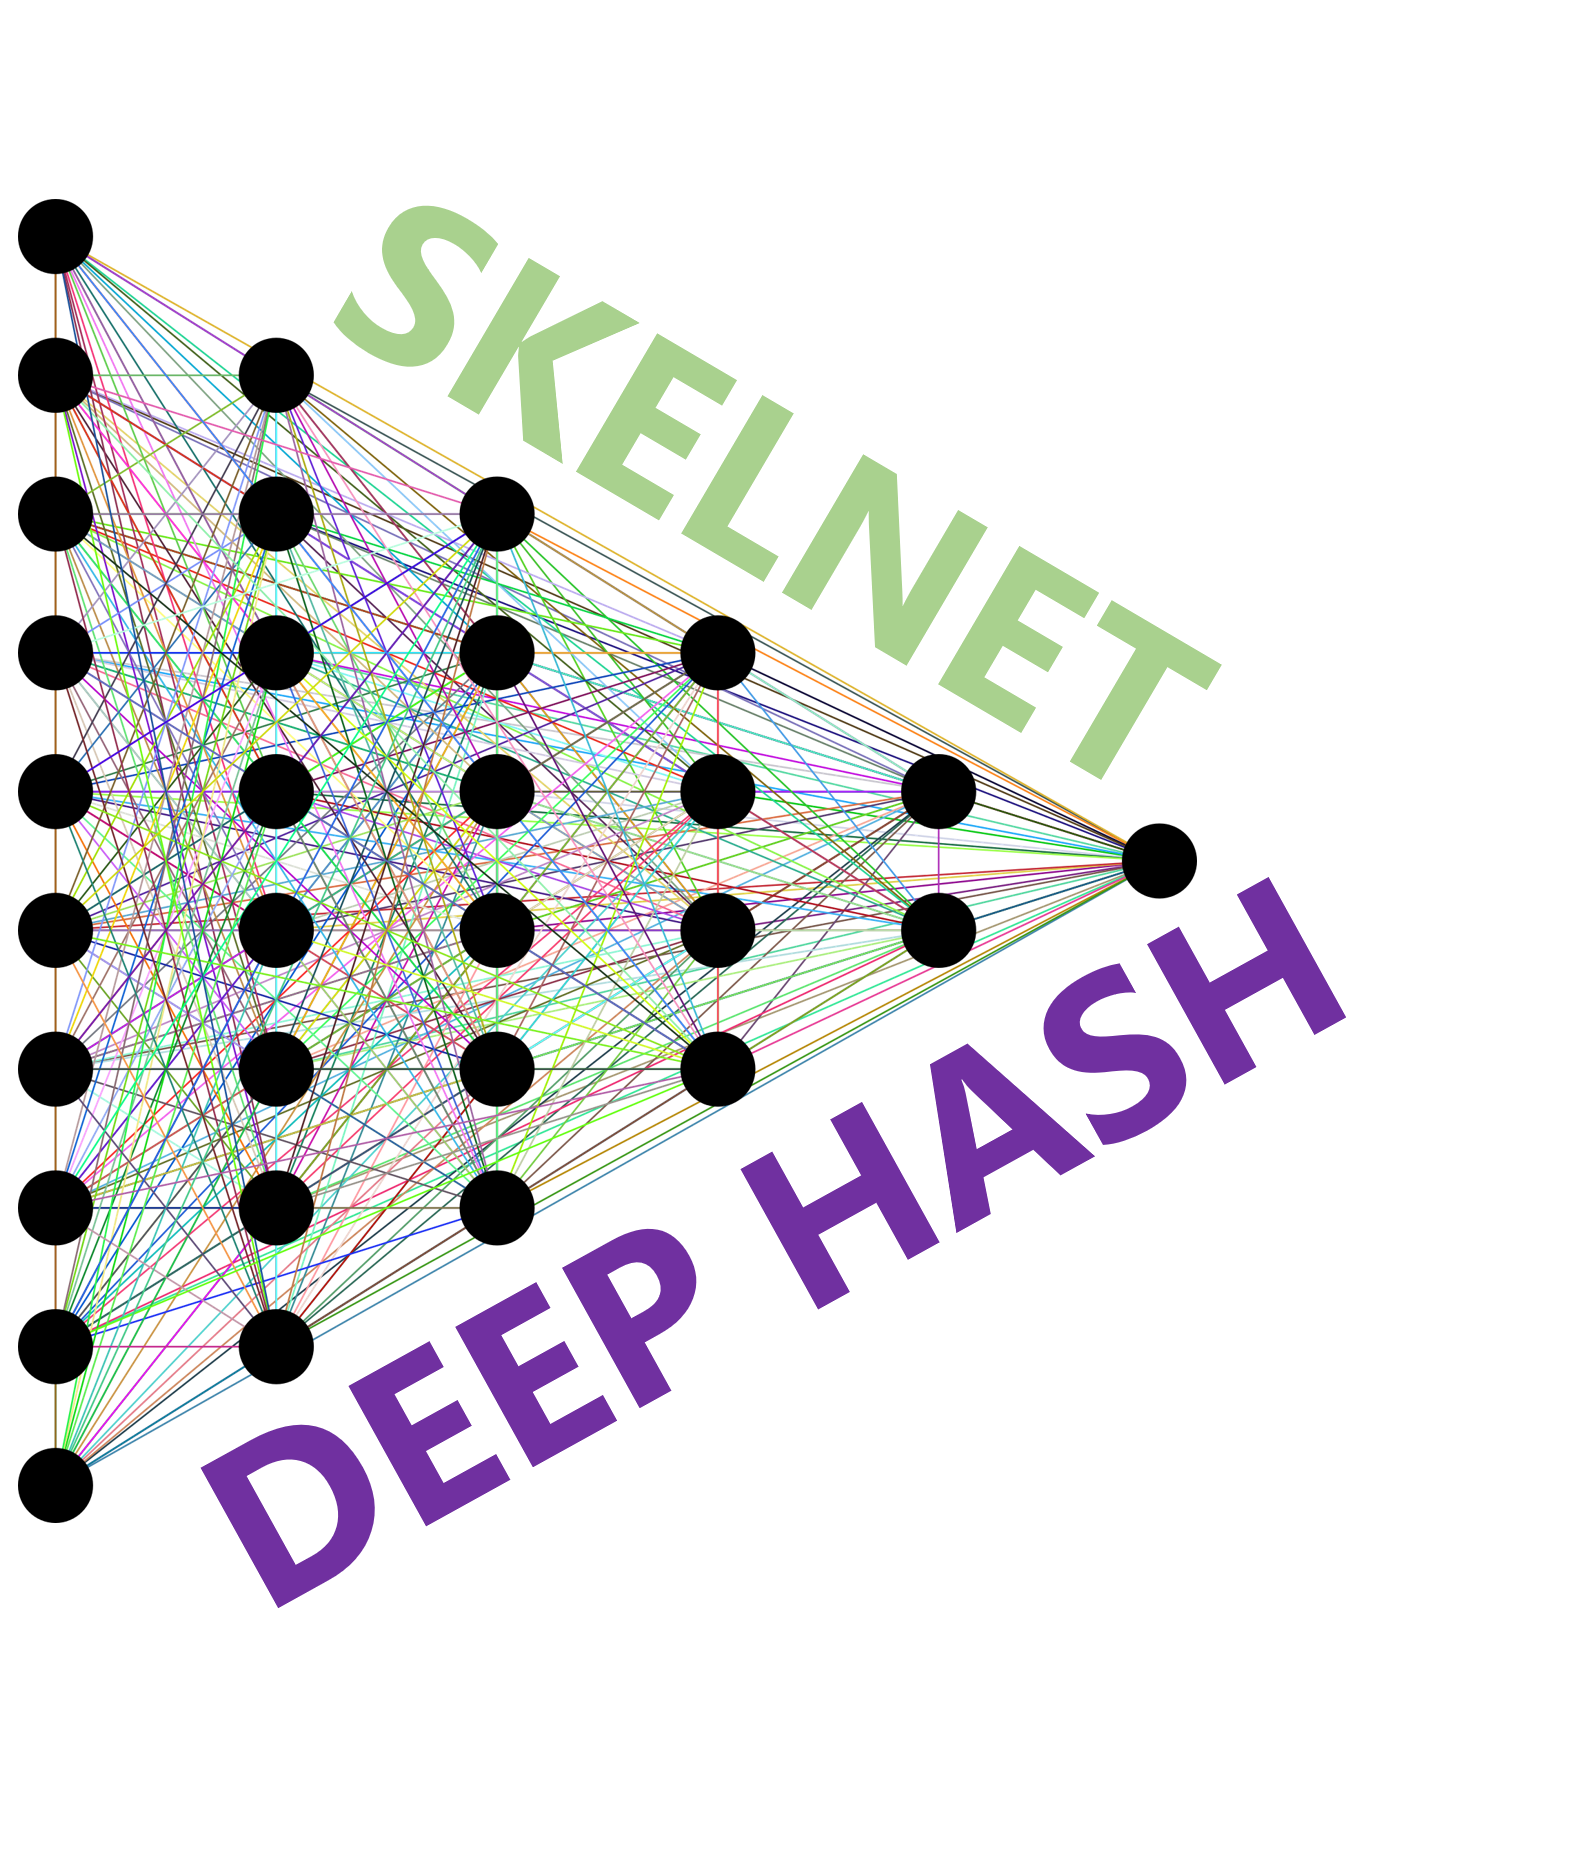 Simulation of how SkelNet and Deep Hasch technologies work together